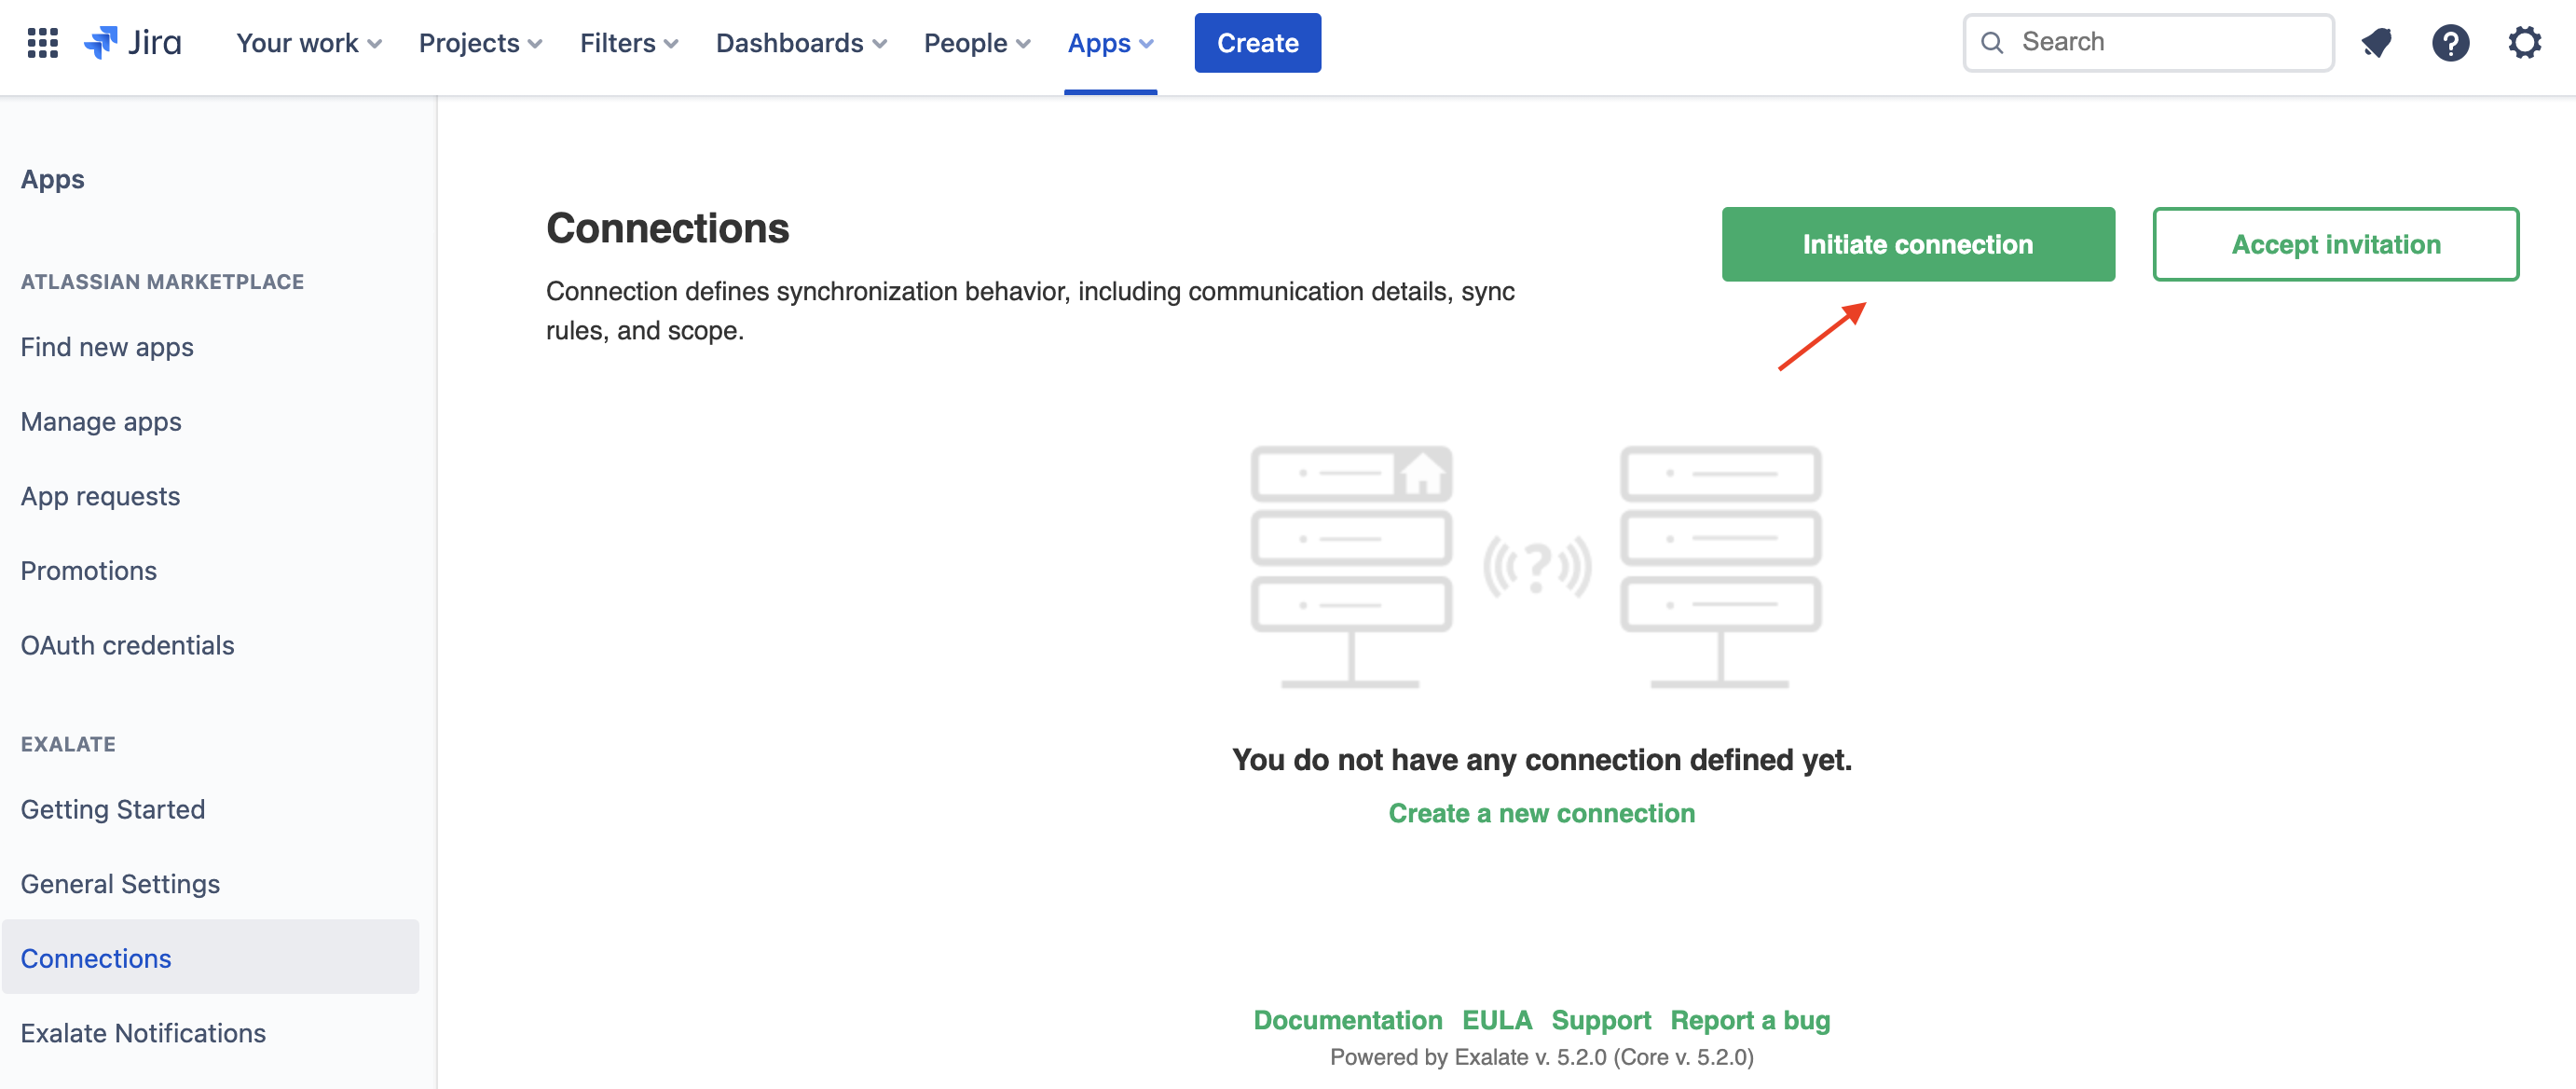 Initiate connection from Jira side